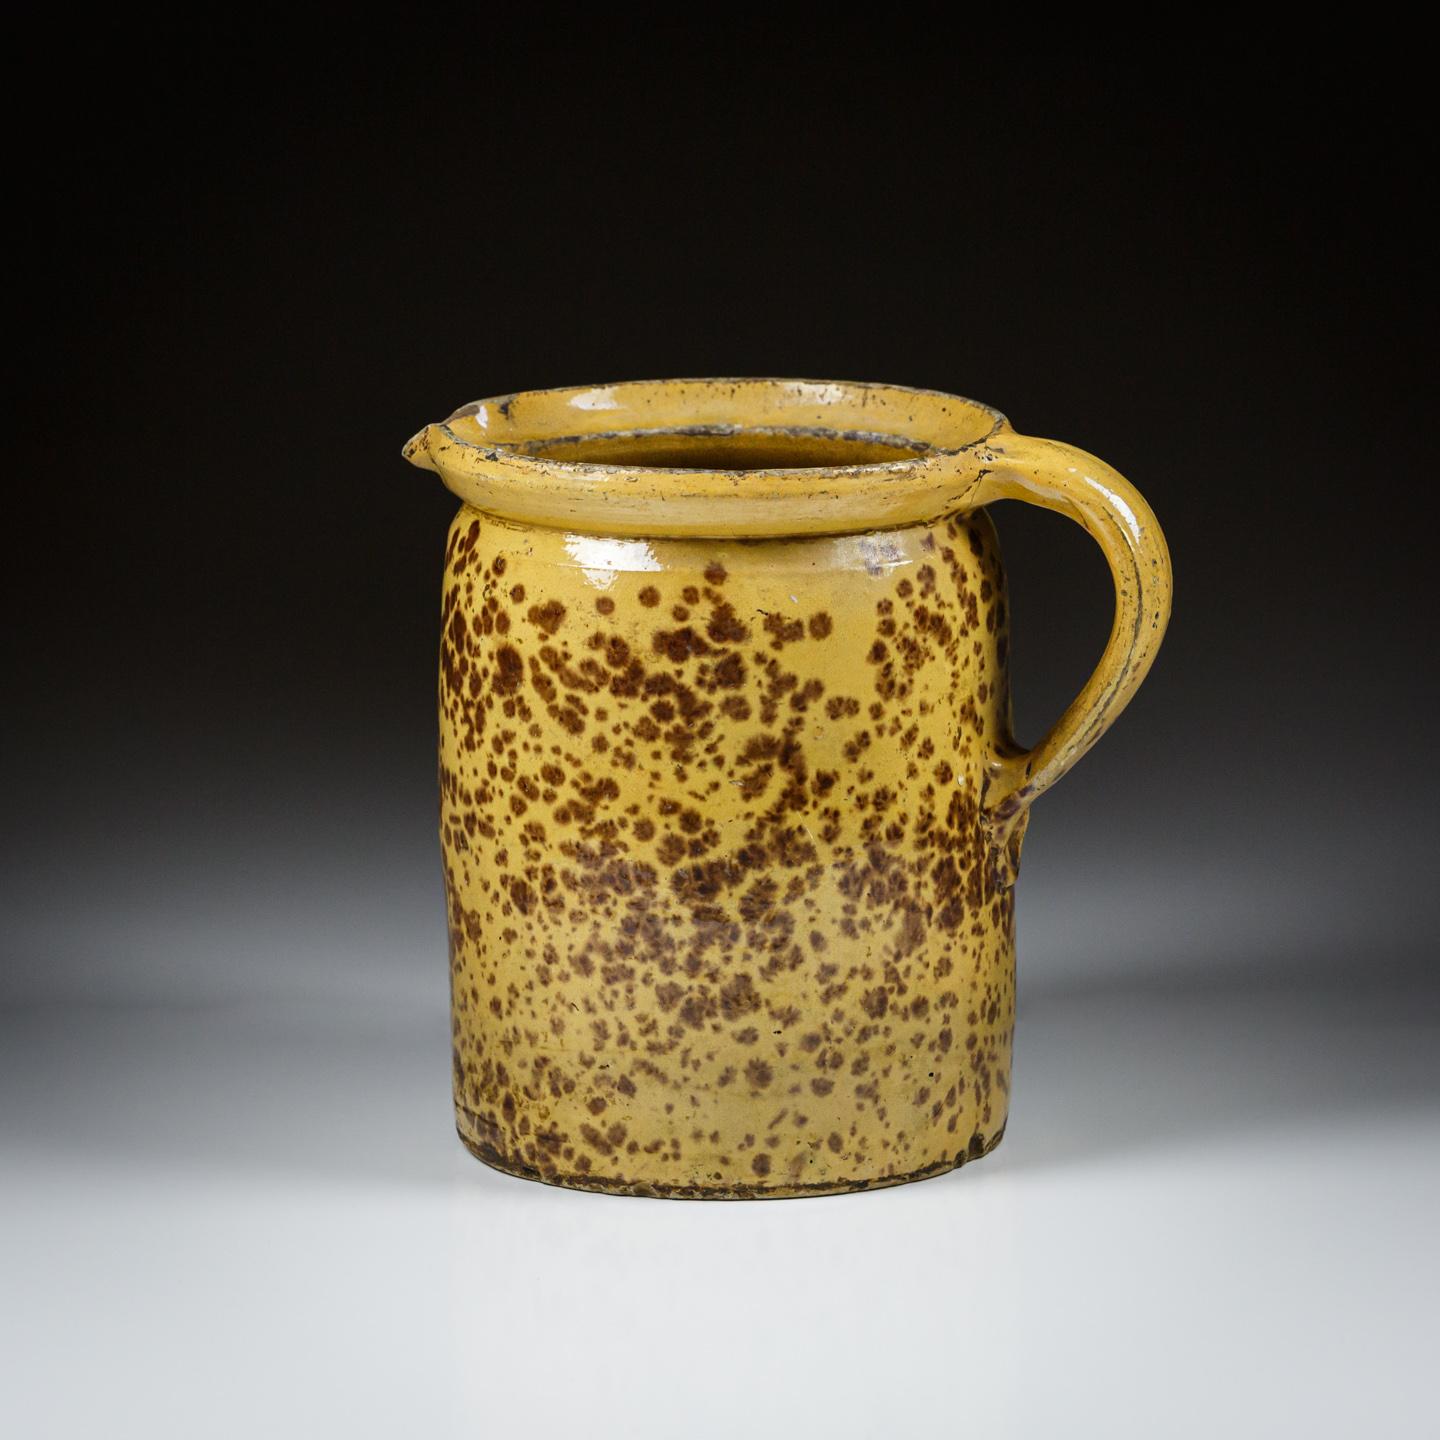 Large 19th Century Slipware Jug. Extraordinary slip decoration. Aside from minor nibbles and minor losses to glaze good condition. France Circa 1820.